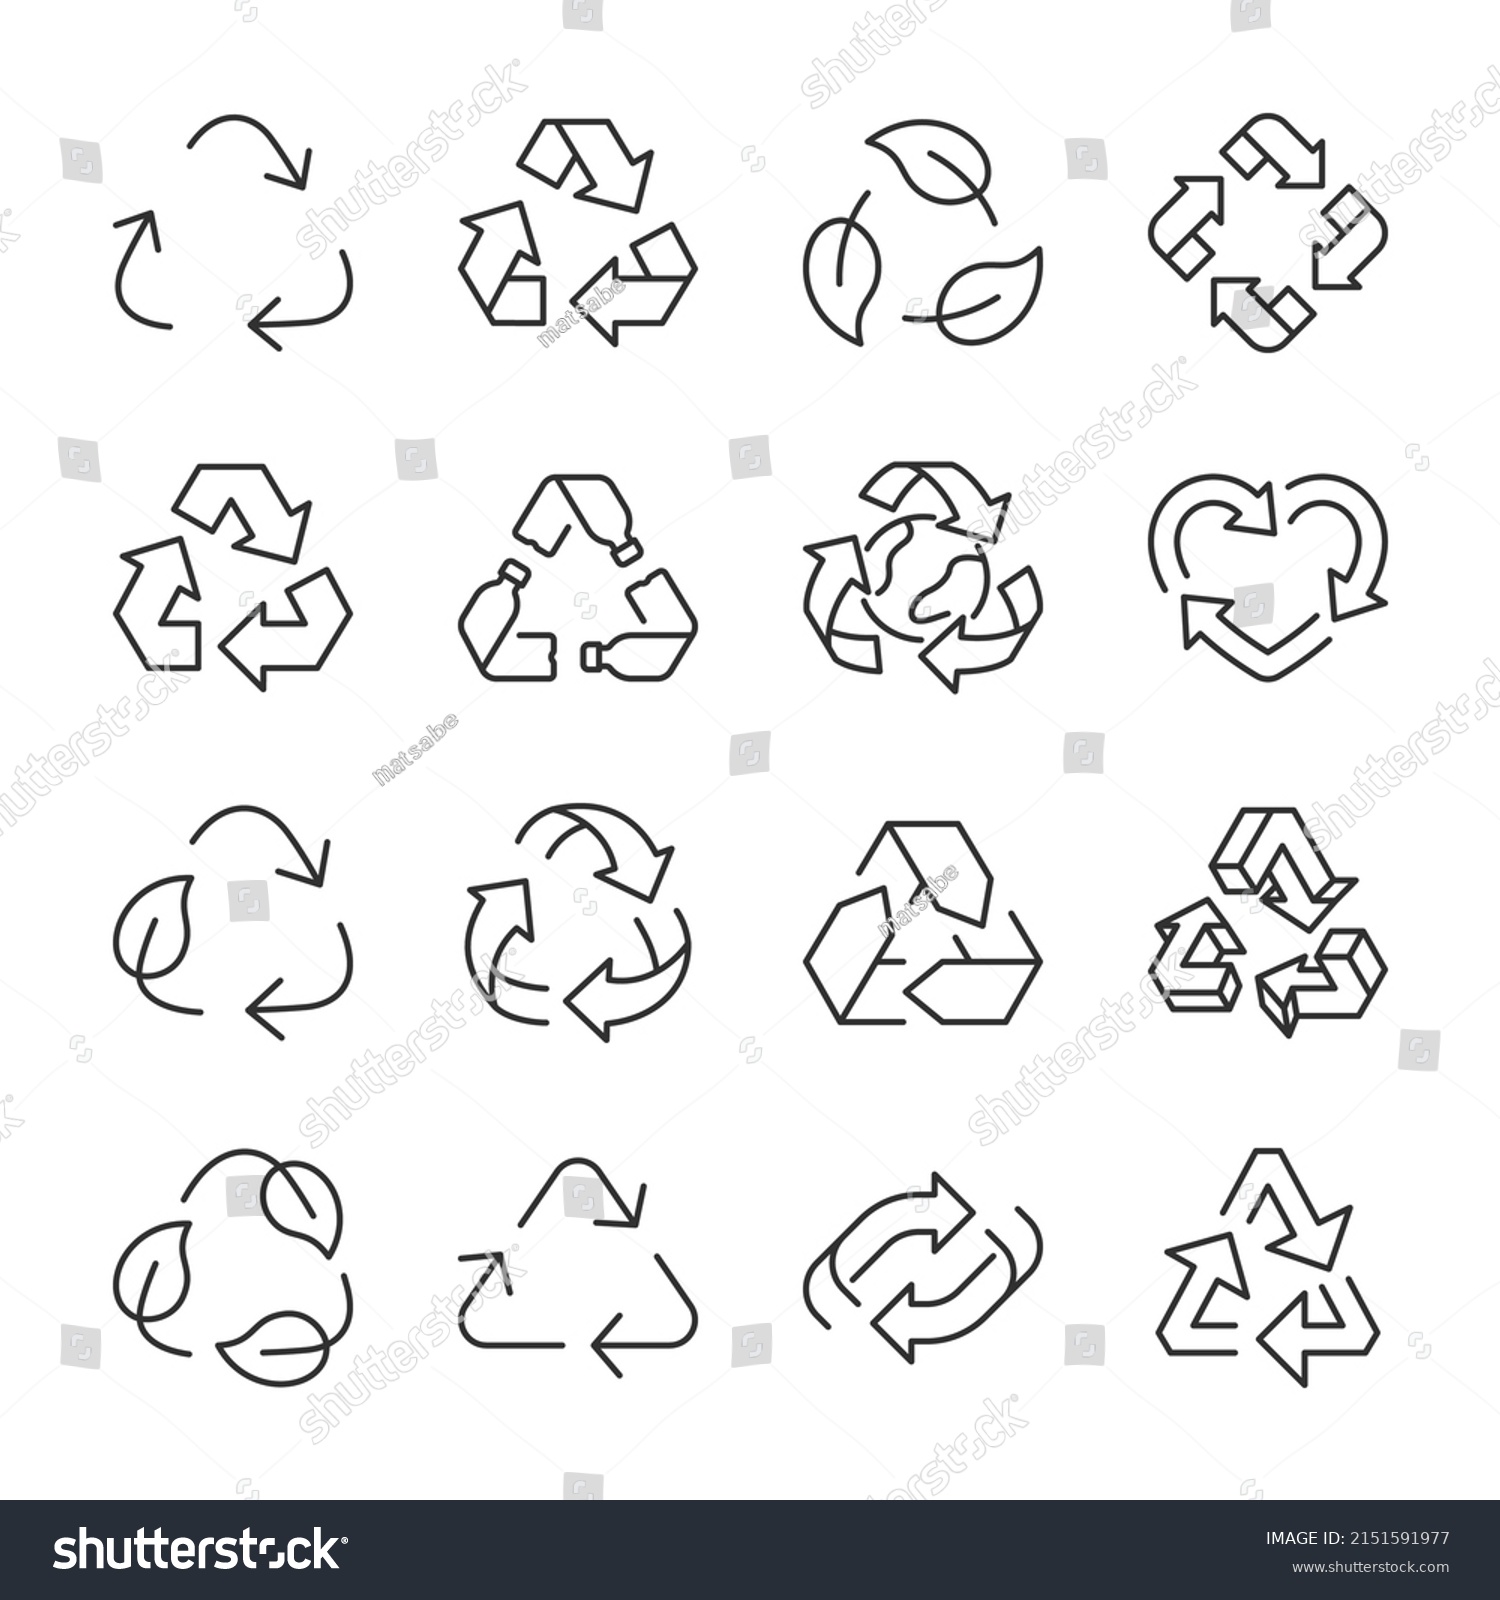 Recycle icons set. Sign of recyclable and biodegradable material, reuse, linear icon collection. Line with editable stroke #2151591977